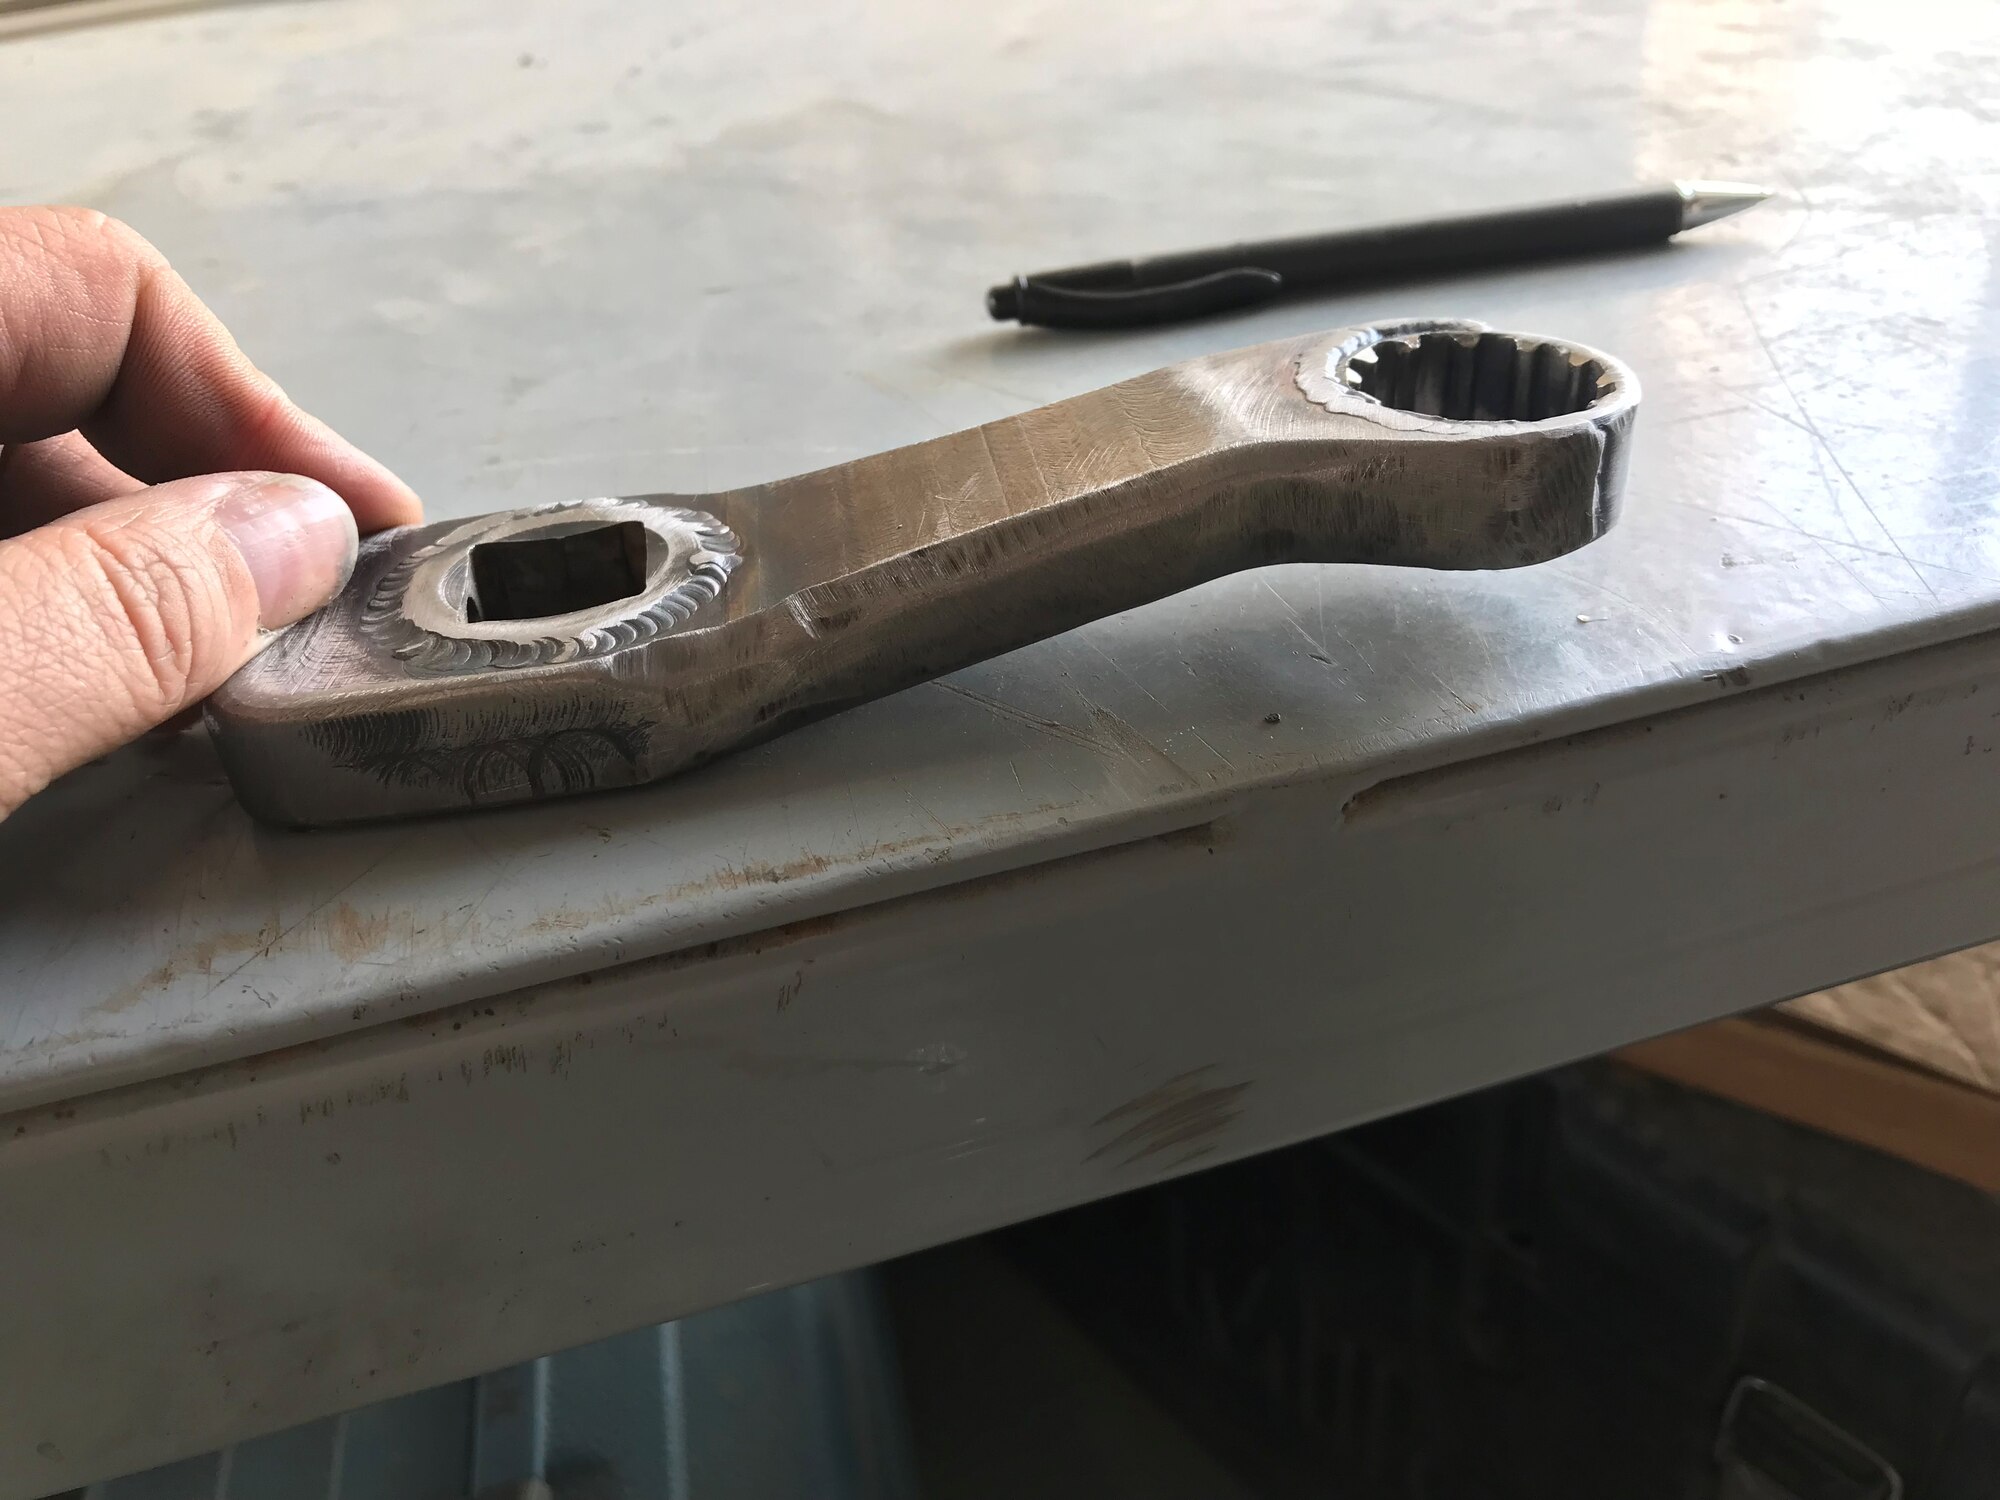 Aircraft metals technology craftsmen from the 148th Fighter Wing designed and fabricated tools, like this dog-leg wrench which was not available commercially, during a deployment to the 407th Air Expeditionary Group, Ahmad al-Jaber Air Base, Kuwait in 2018.